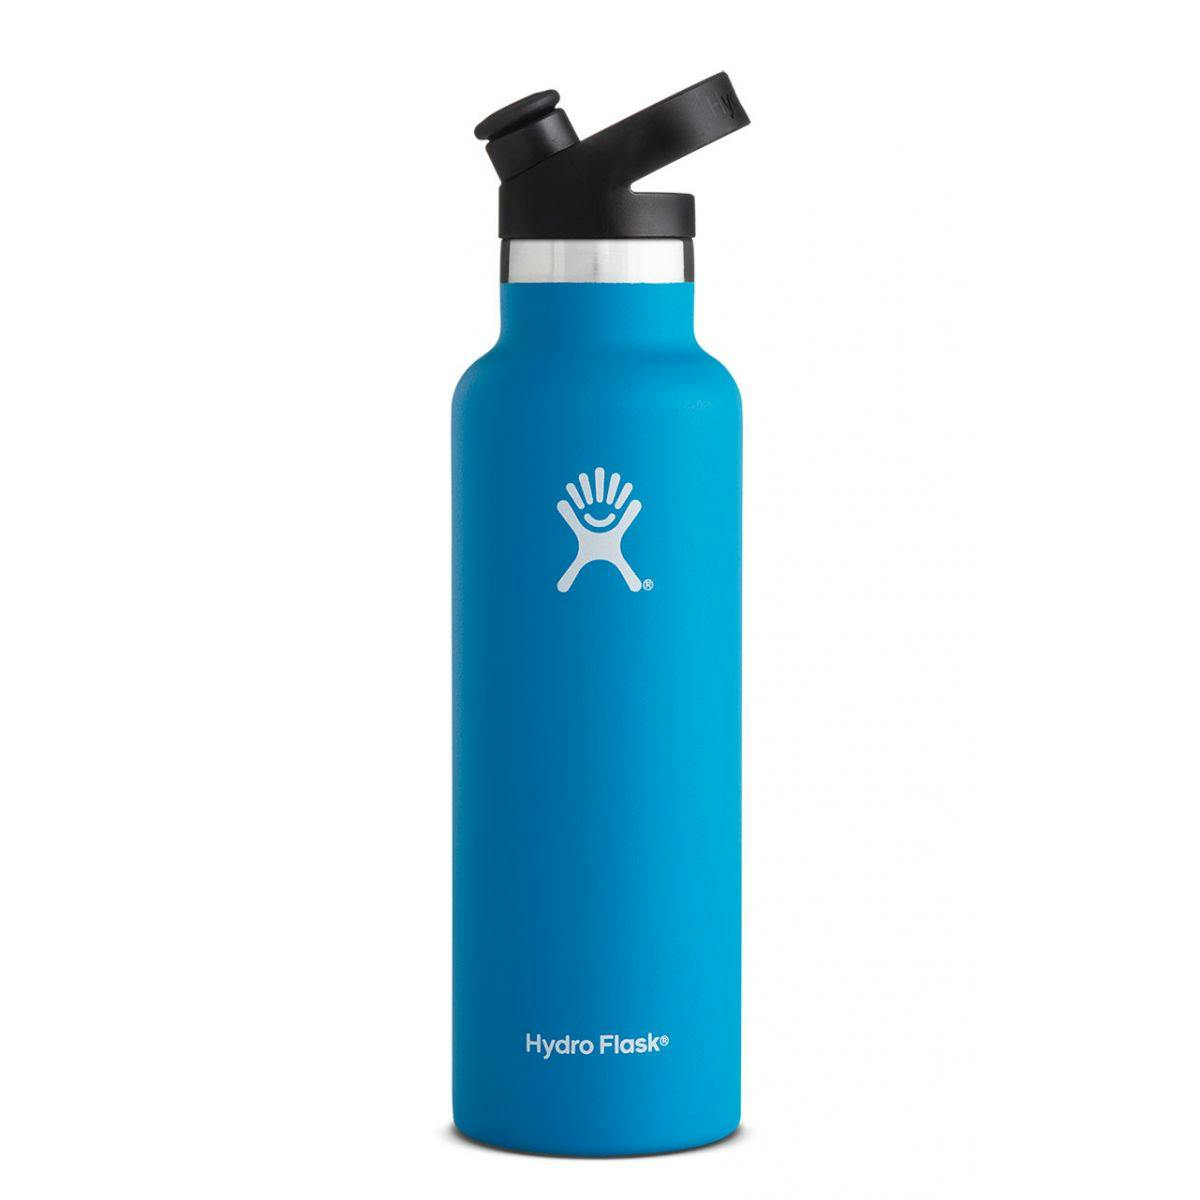 https://activejunky-cdn.s3.amazonaws.com/aj-content/hydro-flask-stainless-steel-vacuum-insulated-water-bottle-21-oz-standard-mouth-sport-cap-pacific.jpg